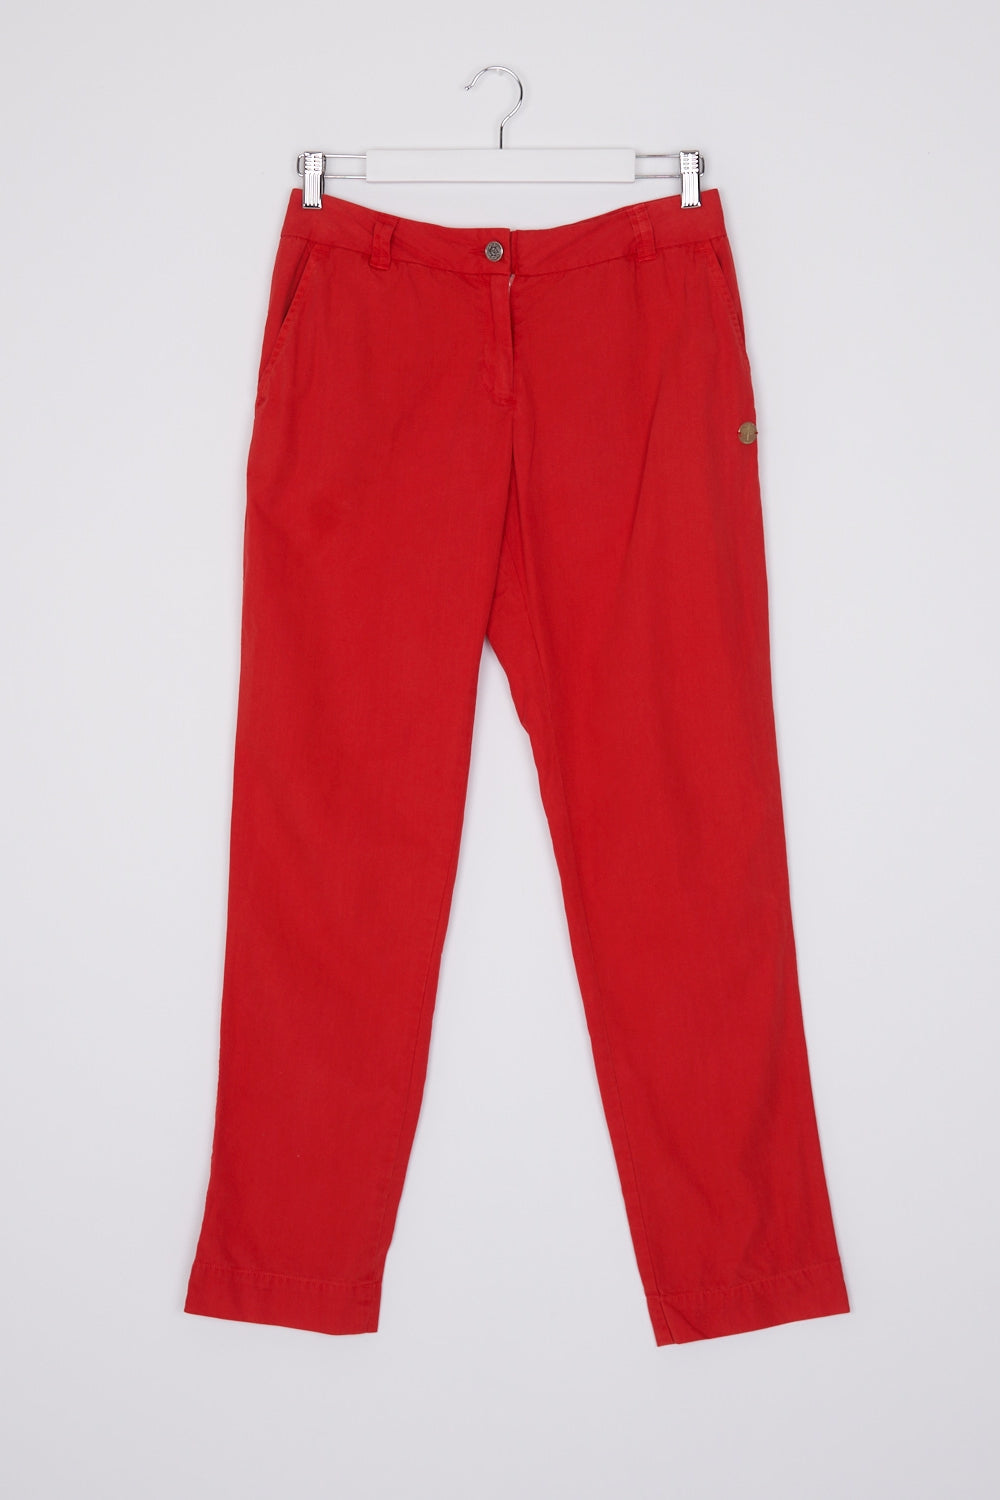 Stella Forest Red Pants AU 10 / 28